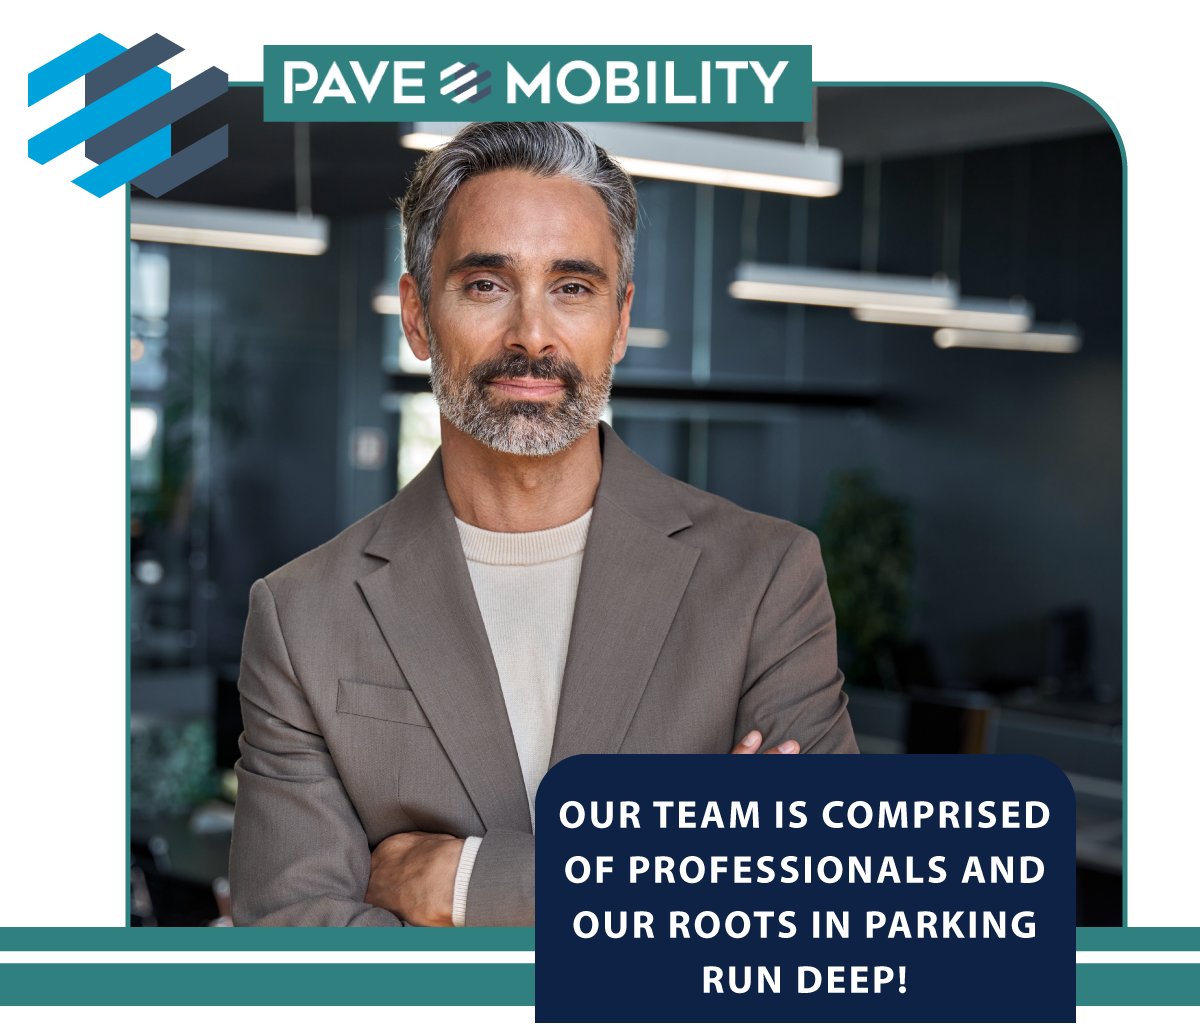 Our team is comprised of professionals and our roots in parking run deep! 🅿️
Learn more about how PAVE Mobility is part of the parking industry revolution >> hubs.la/Q02vGPLZ0 

#parkingtech #parking #technology #enforcement #UrbanMobility #smartparking #MobilitySolutions